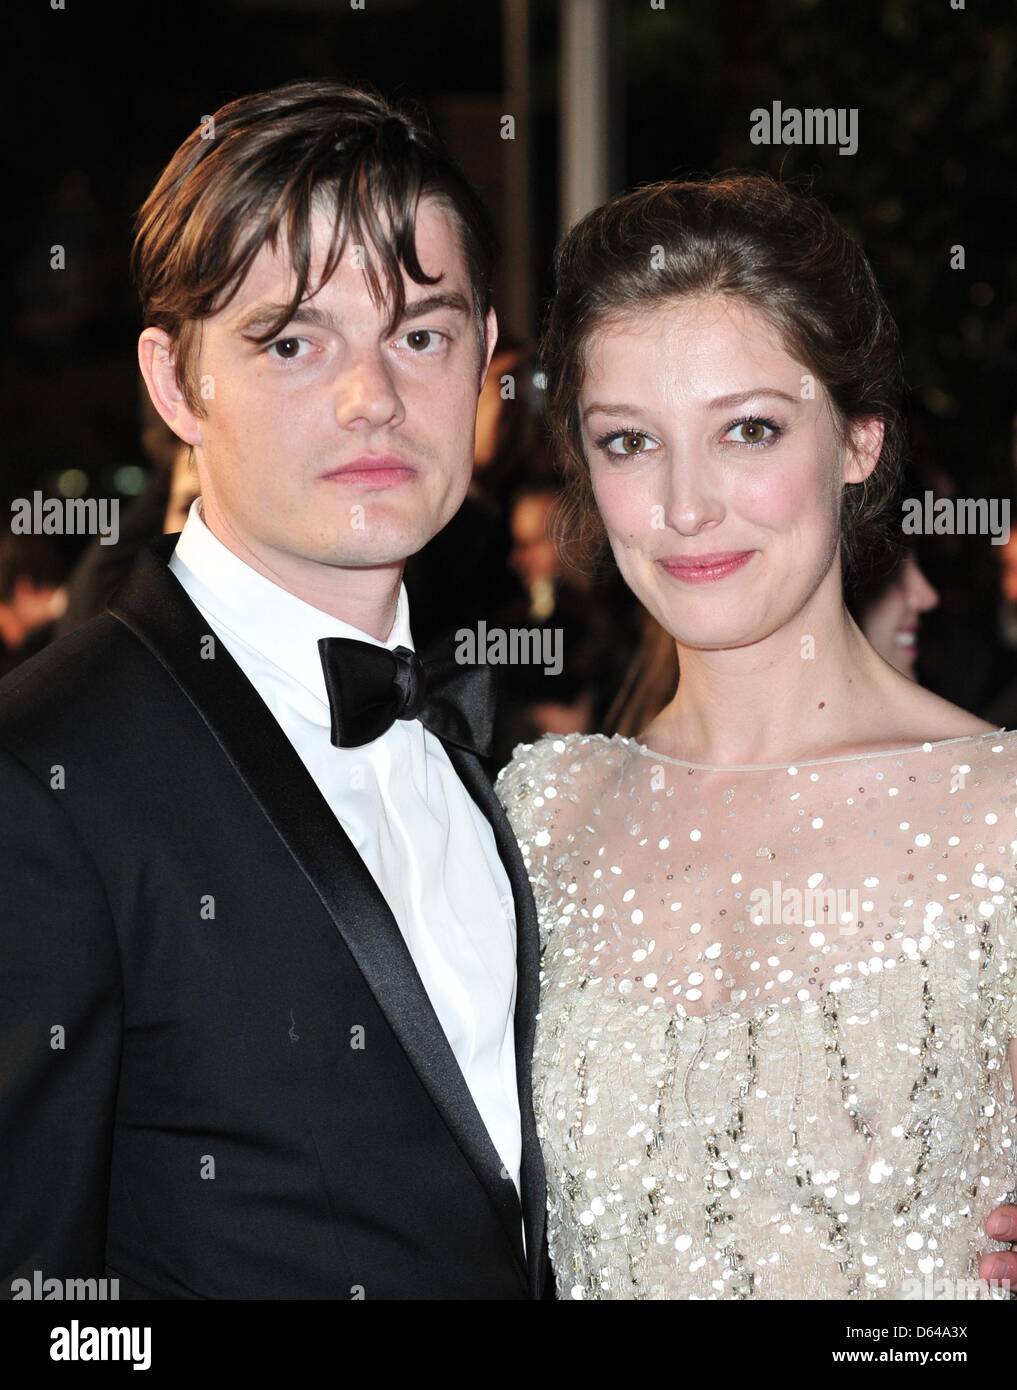 German actress Alexandra Maria Lara and her husband, actor Sam Riley arrive at the premiere of 'On The Road' during the 65th Cannes Film Festival at Palais des Festivals in Cannes, France, on 23 May 2012. Photo: Hubert Boesl Stock Photo